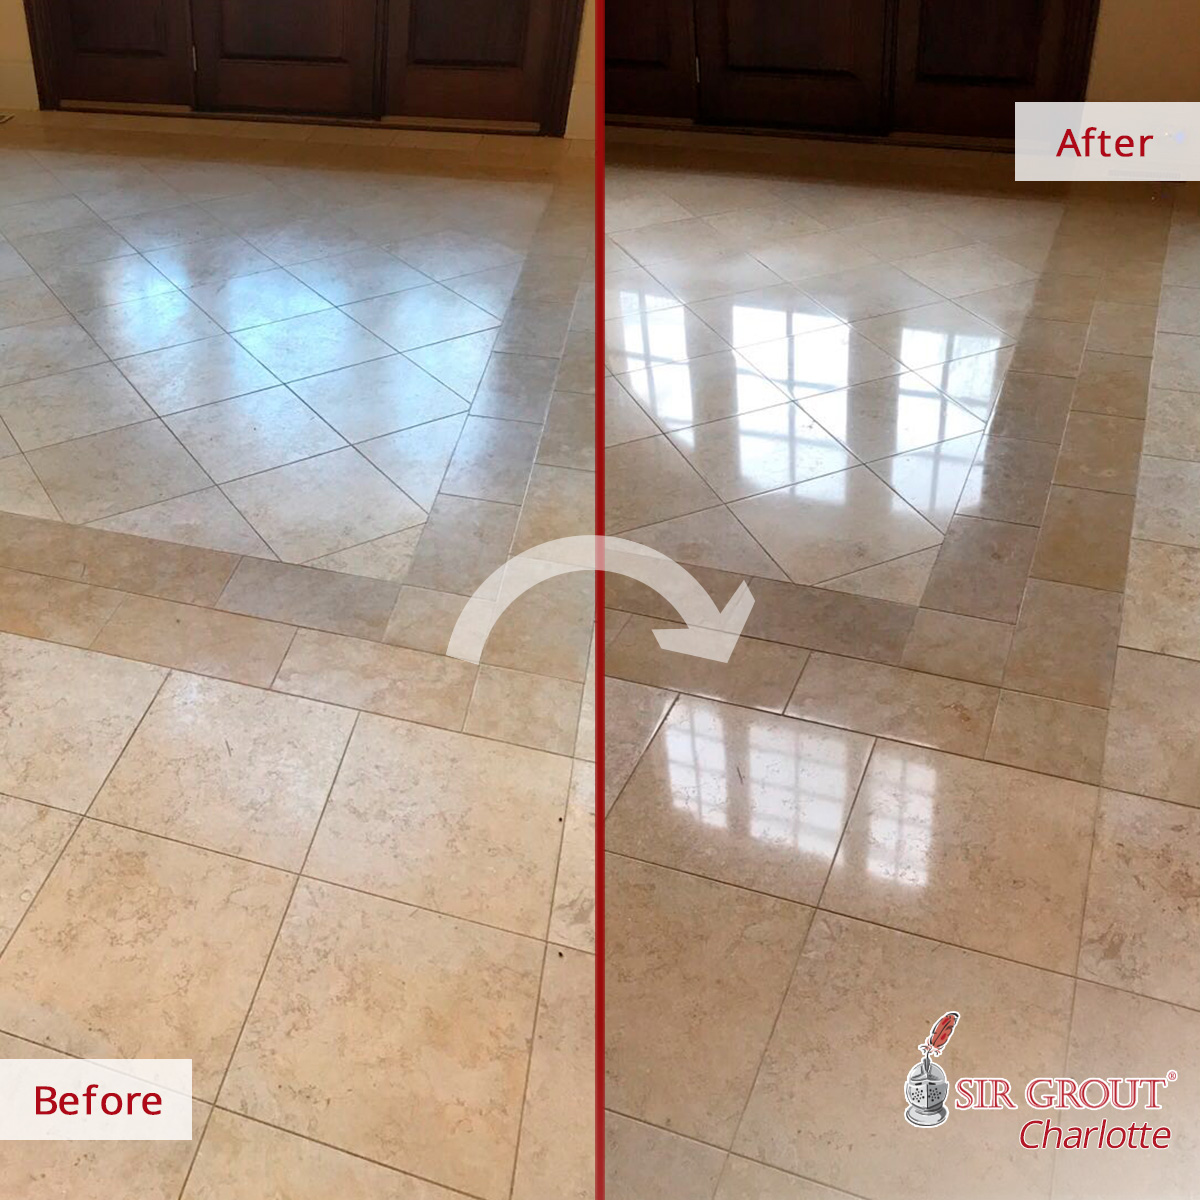 What Is the Purpose of Tile Grout? - Limestone